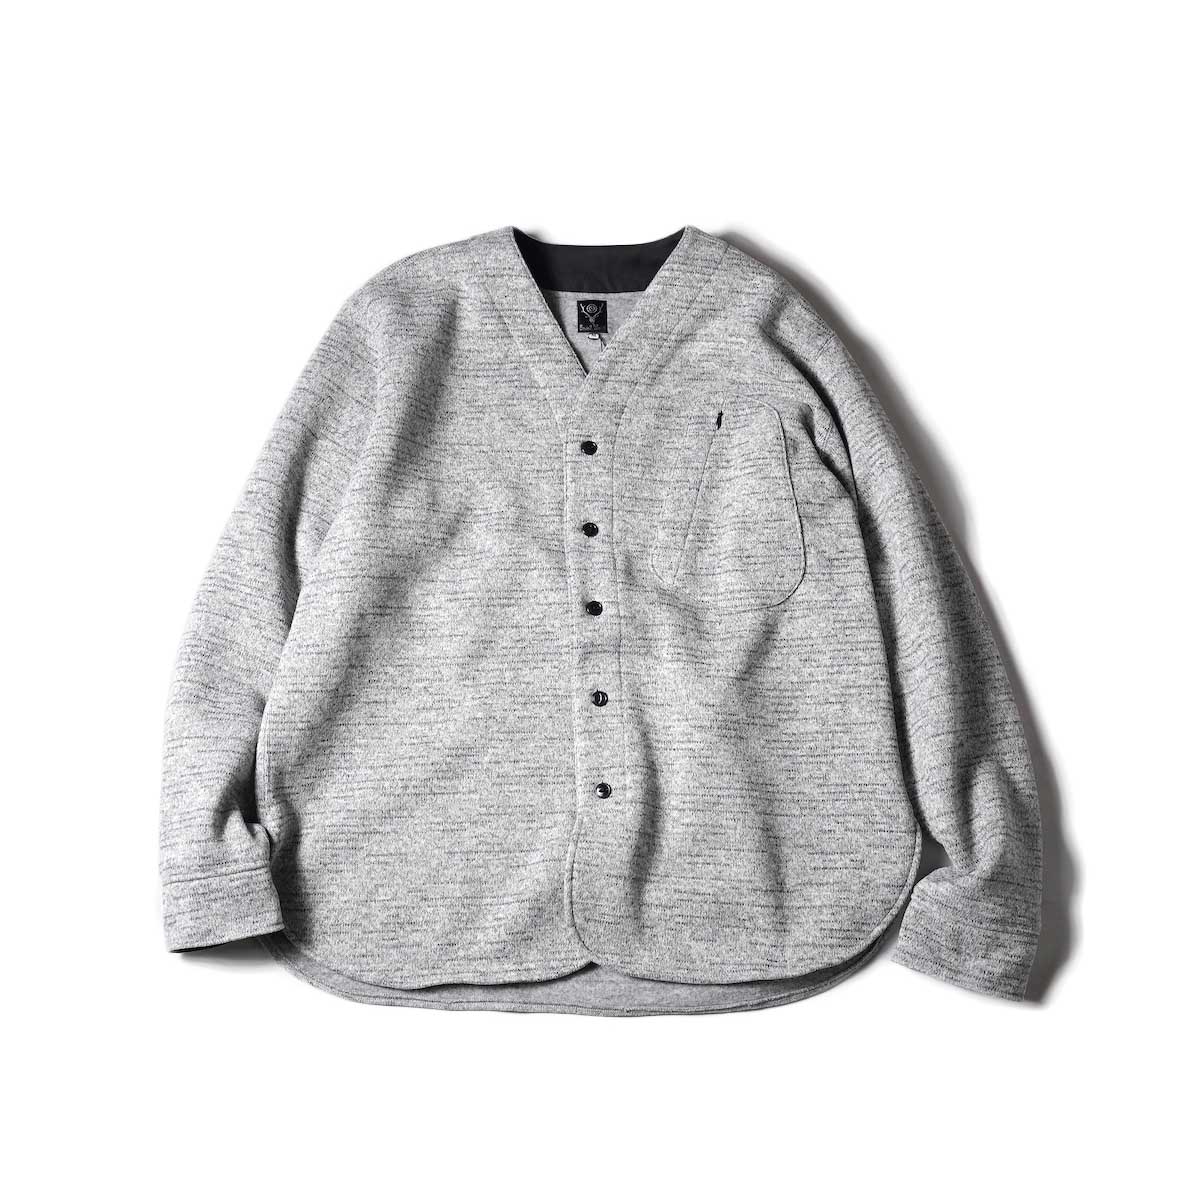 South2 West8 / Scouting Shirt - POLARTEC Fleece Lined Jersey (Grey)正面